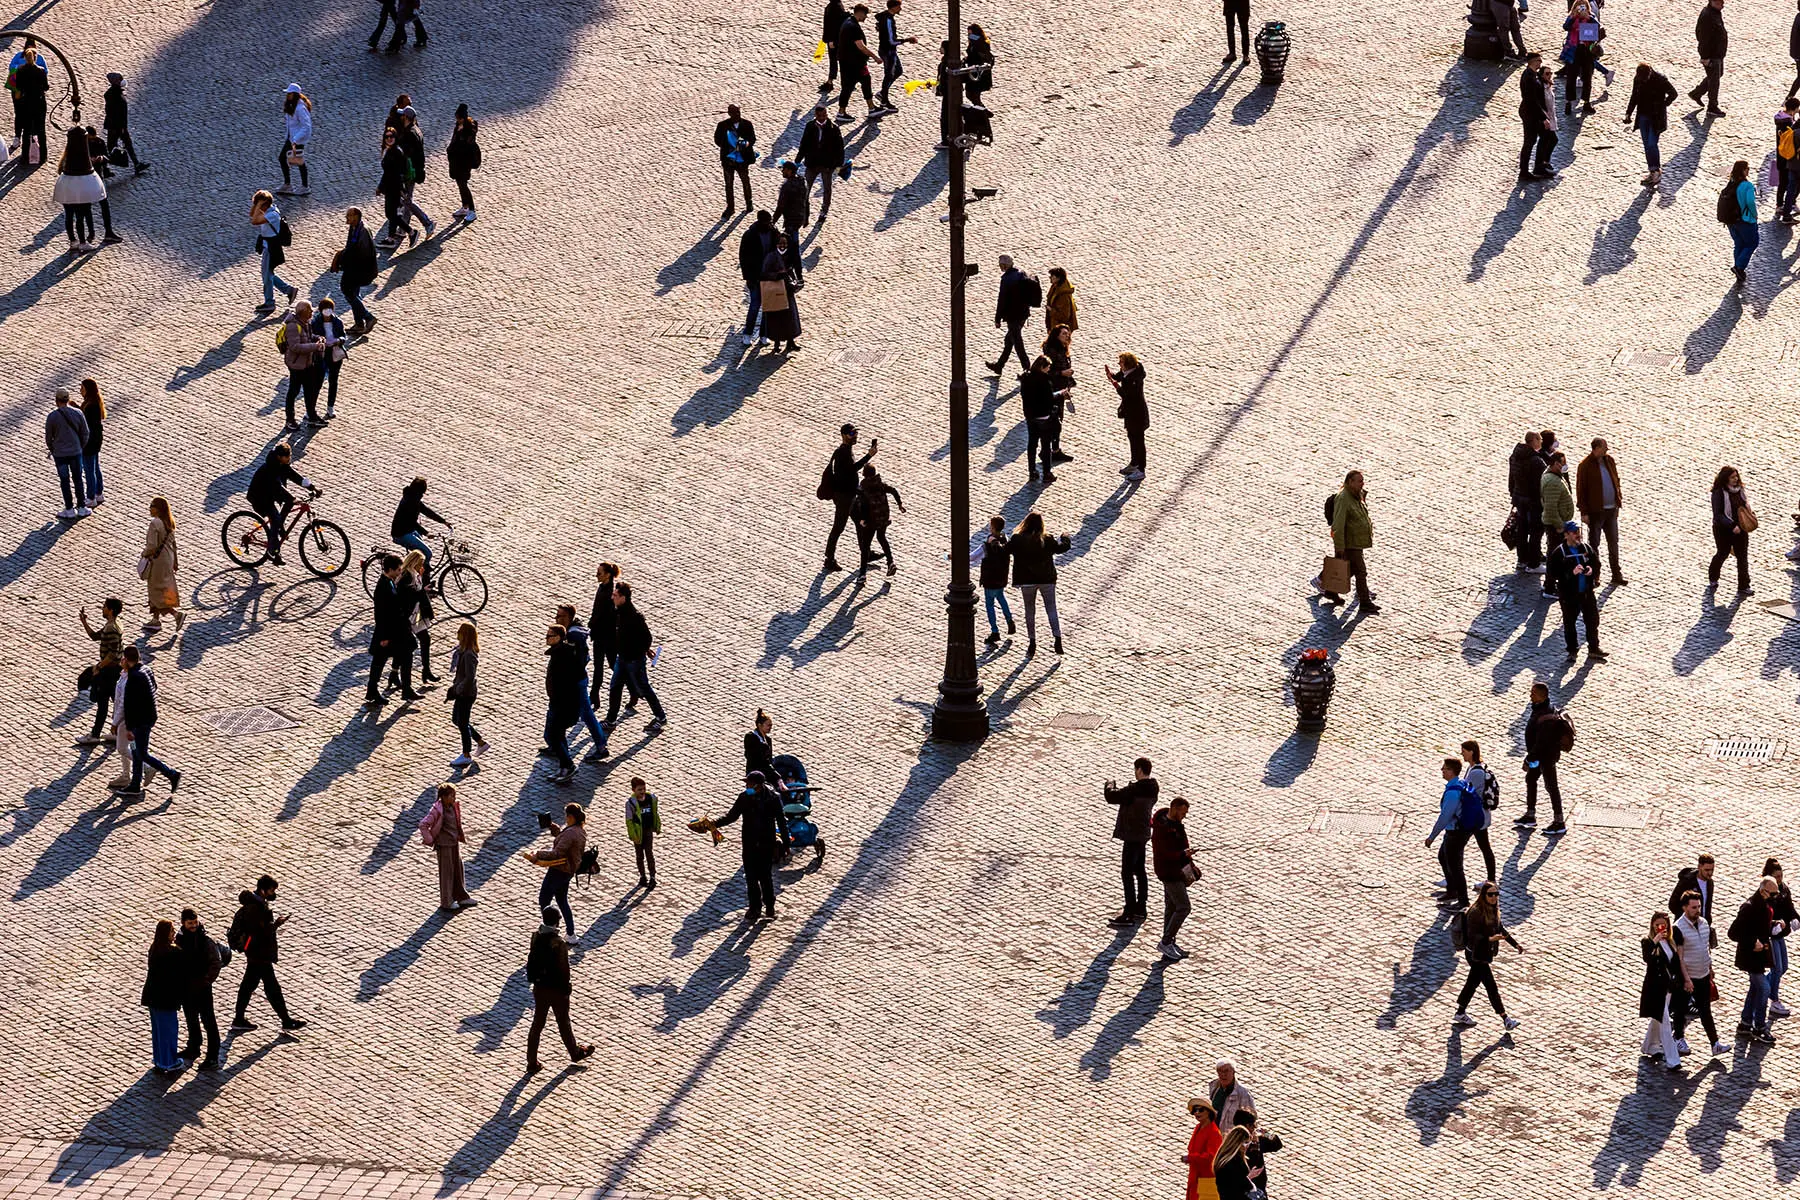 Aerial view of people crossing a piazza in Rome, Italy